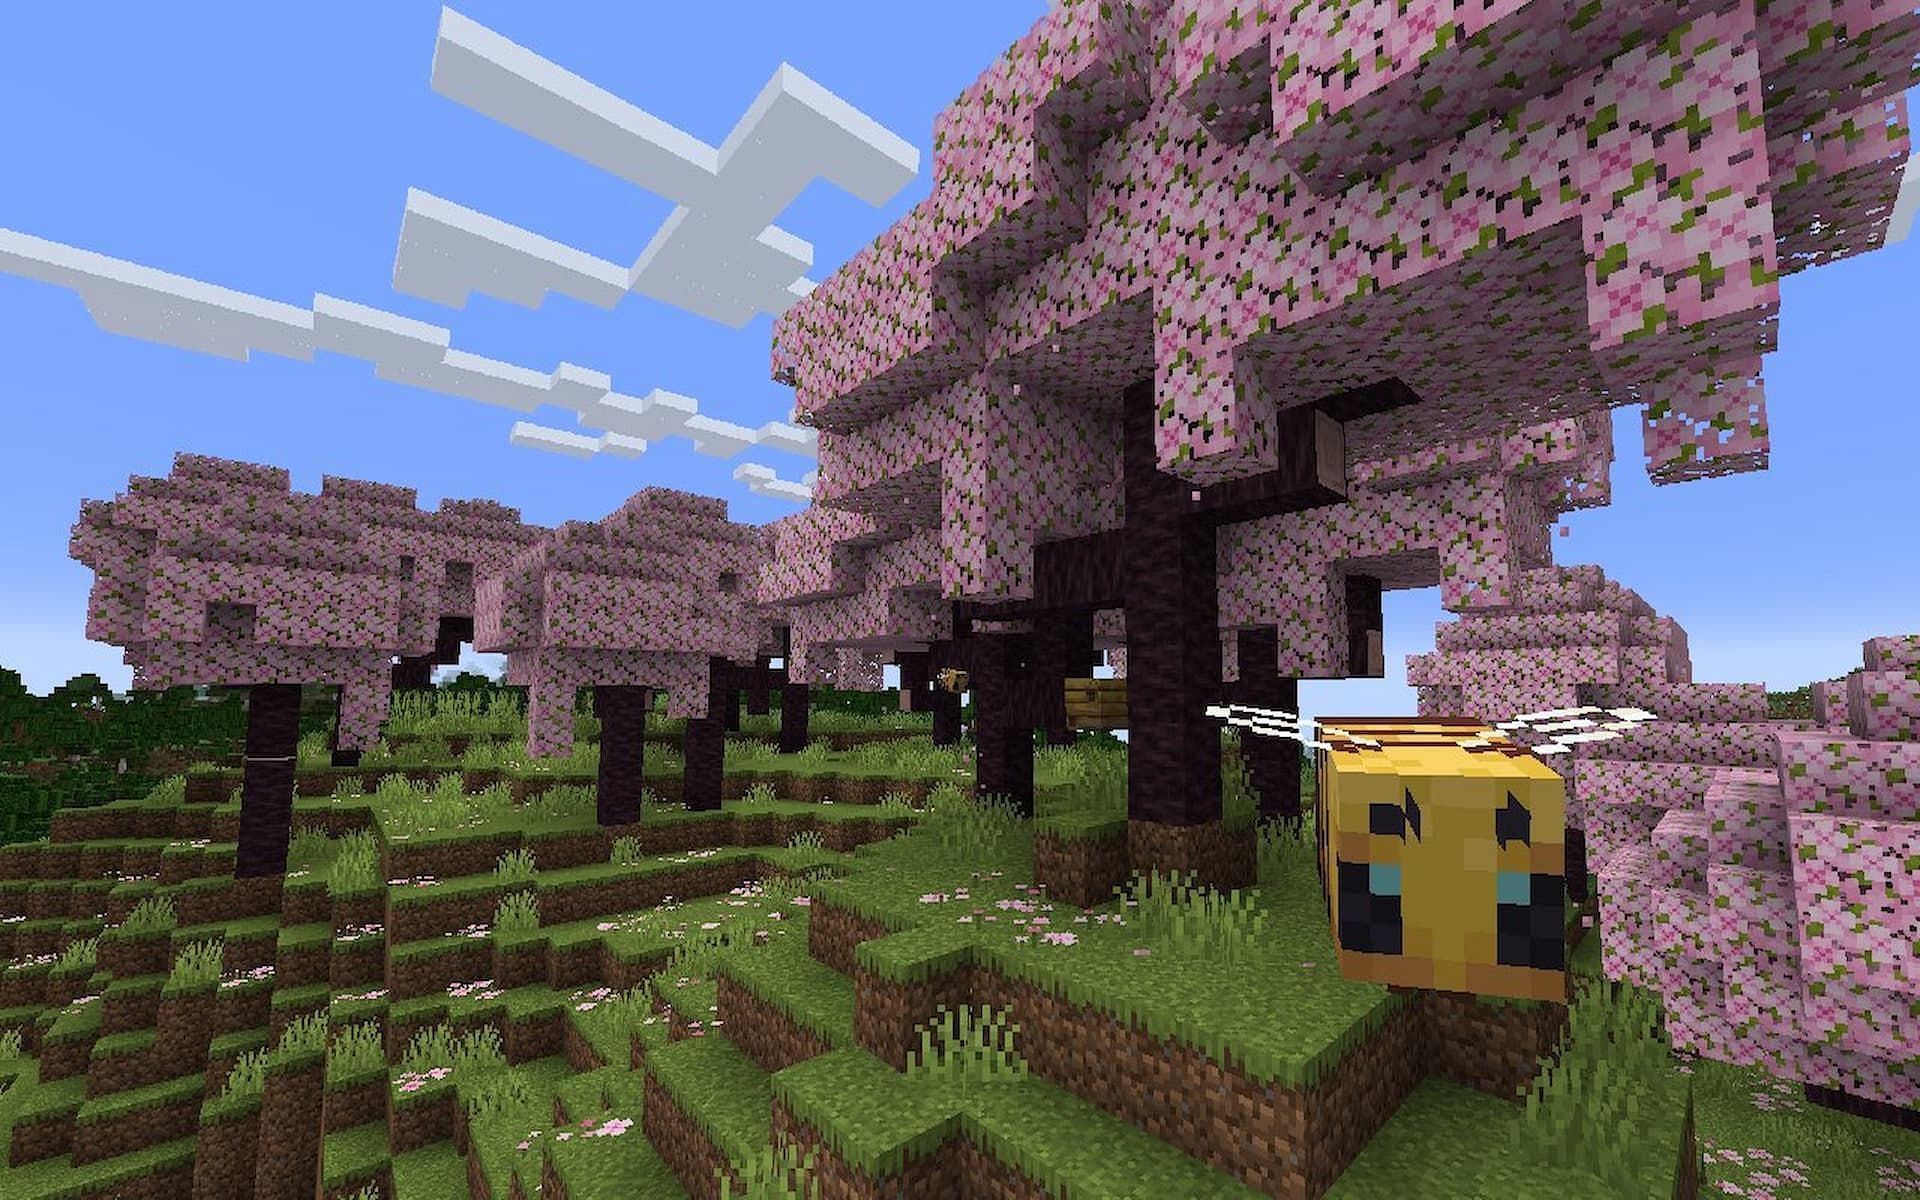 Players can explore the beautiful pink scenery in the Cherry Blossom biome (Image via Mojang)